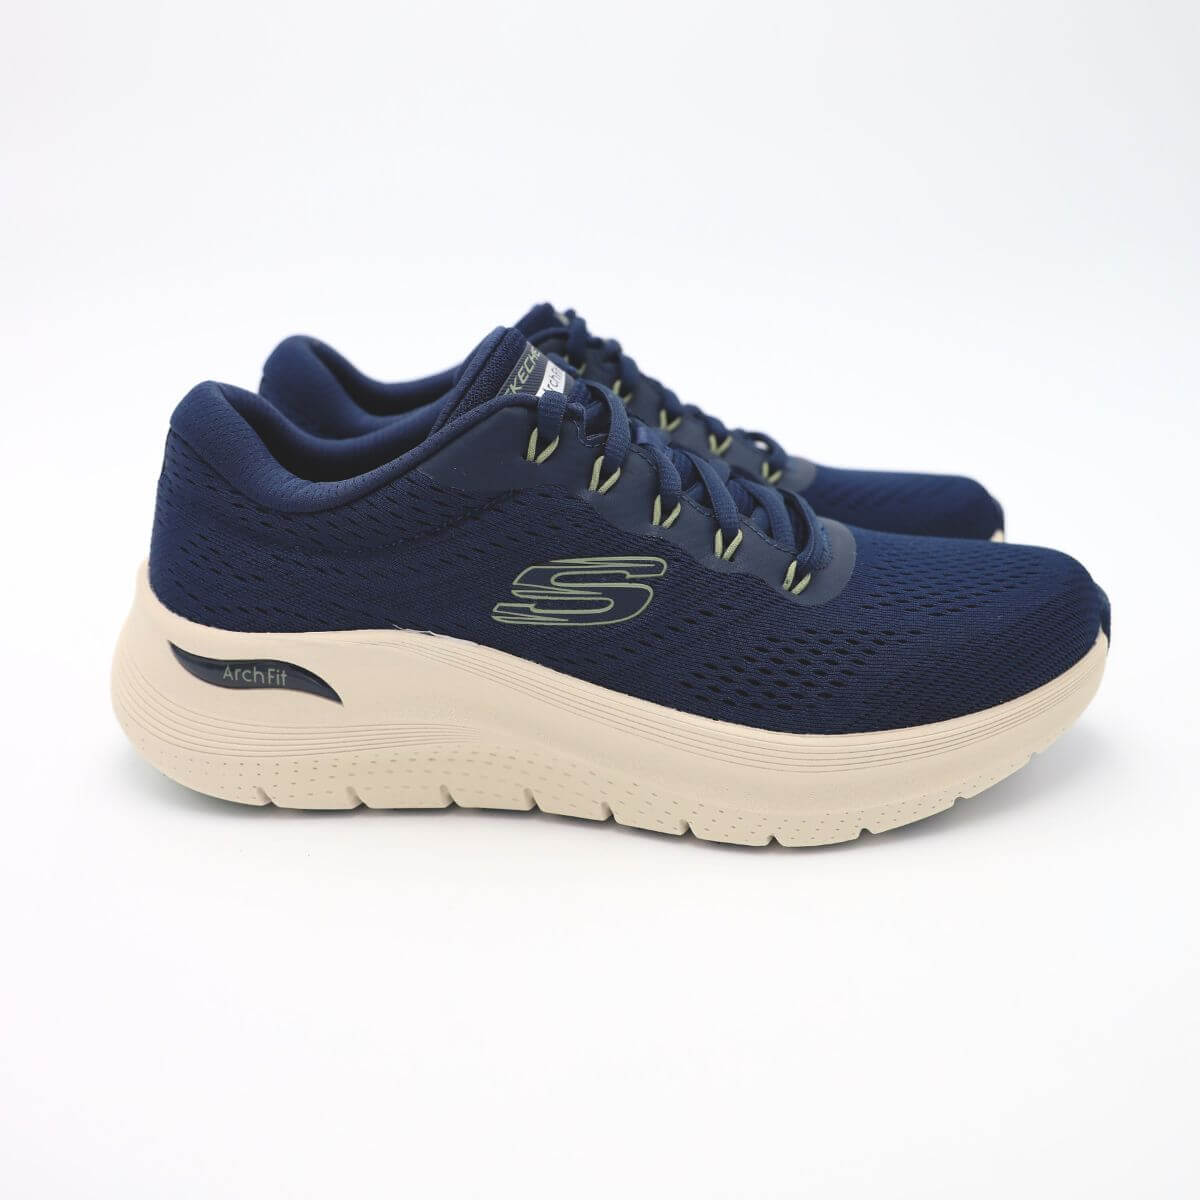 SKECHERS SNEAKERS 232700-NVY BLU ARCH FIT